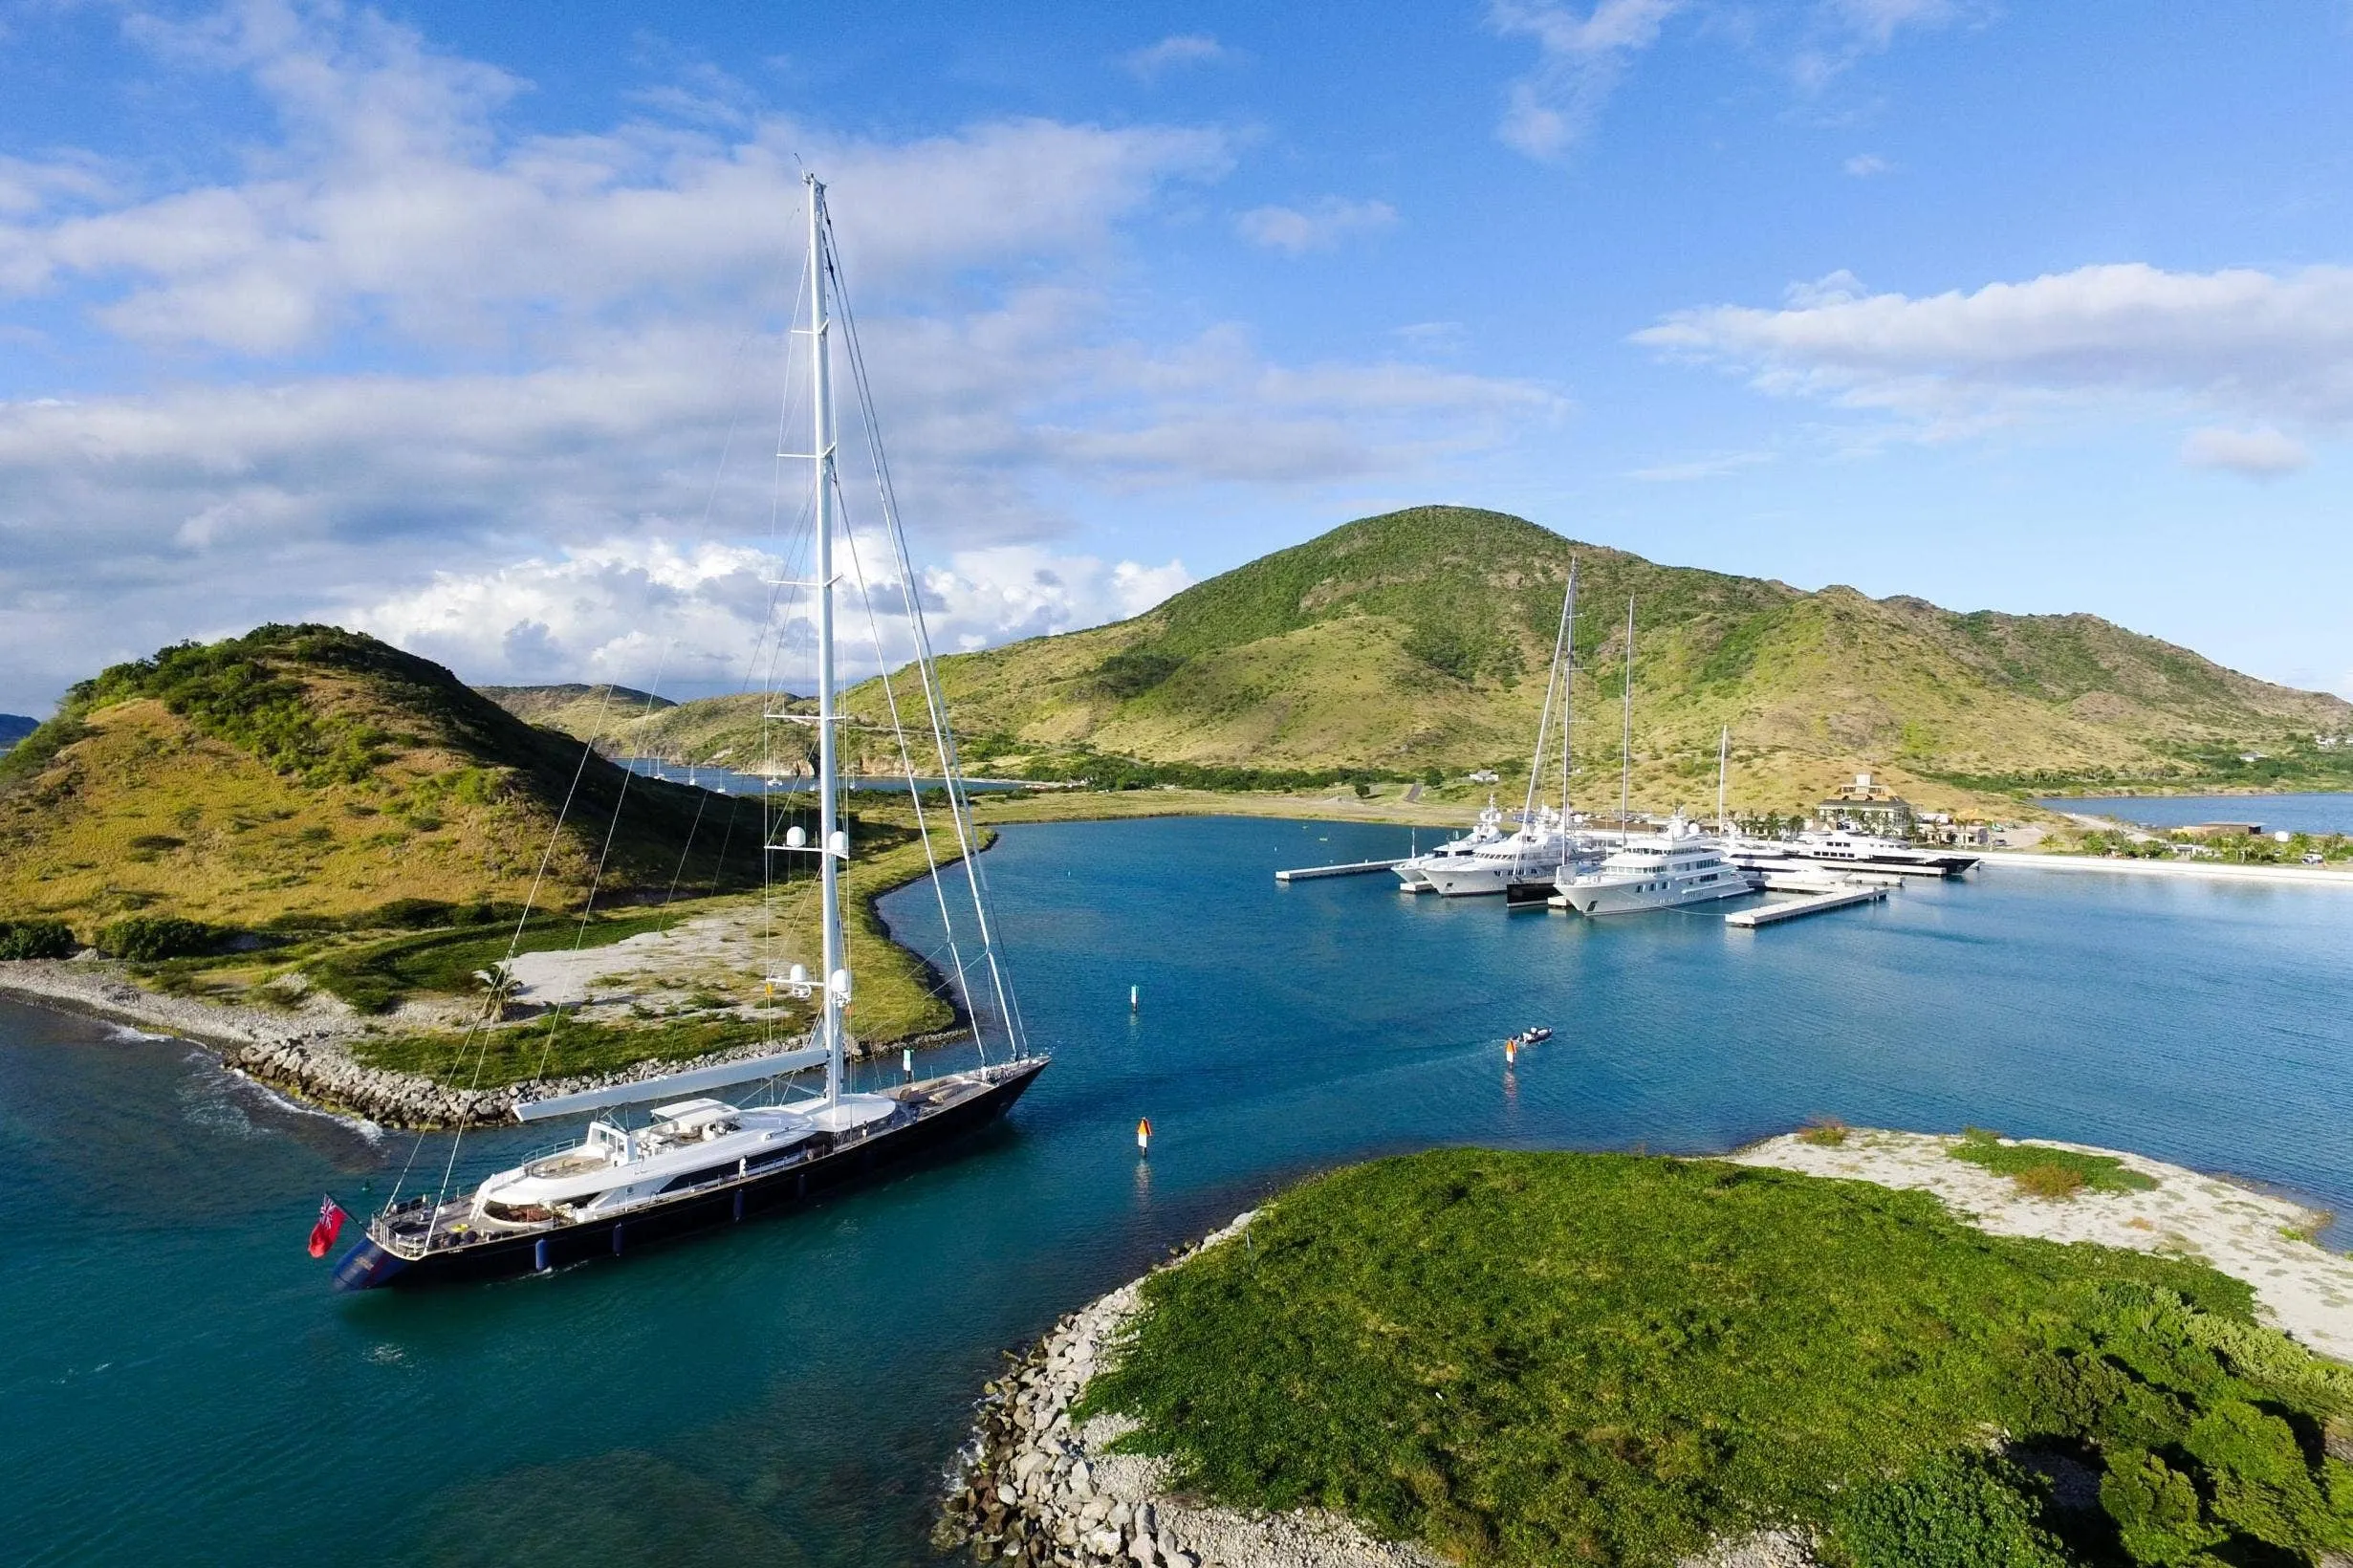 Leeward Islands Charters in Saint Kitts and Nevis, Caribbean | Excursions - Rated 0.8